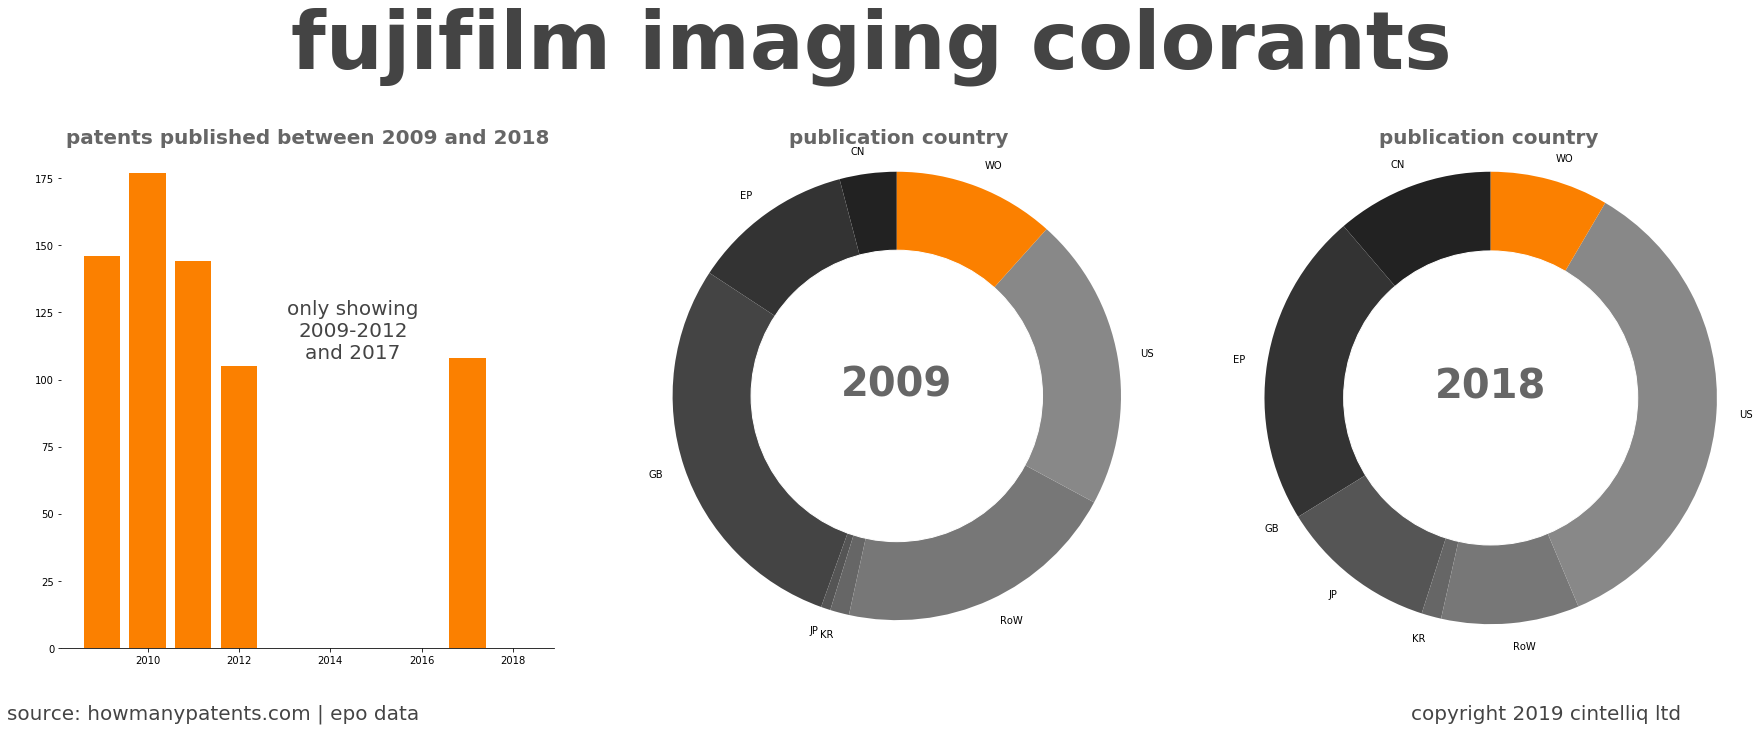 summary of patents for Fujifilm Imaging Colorants